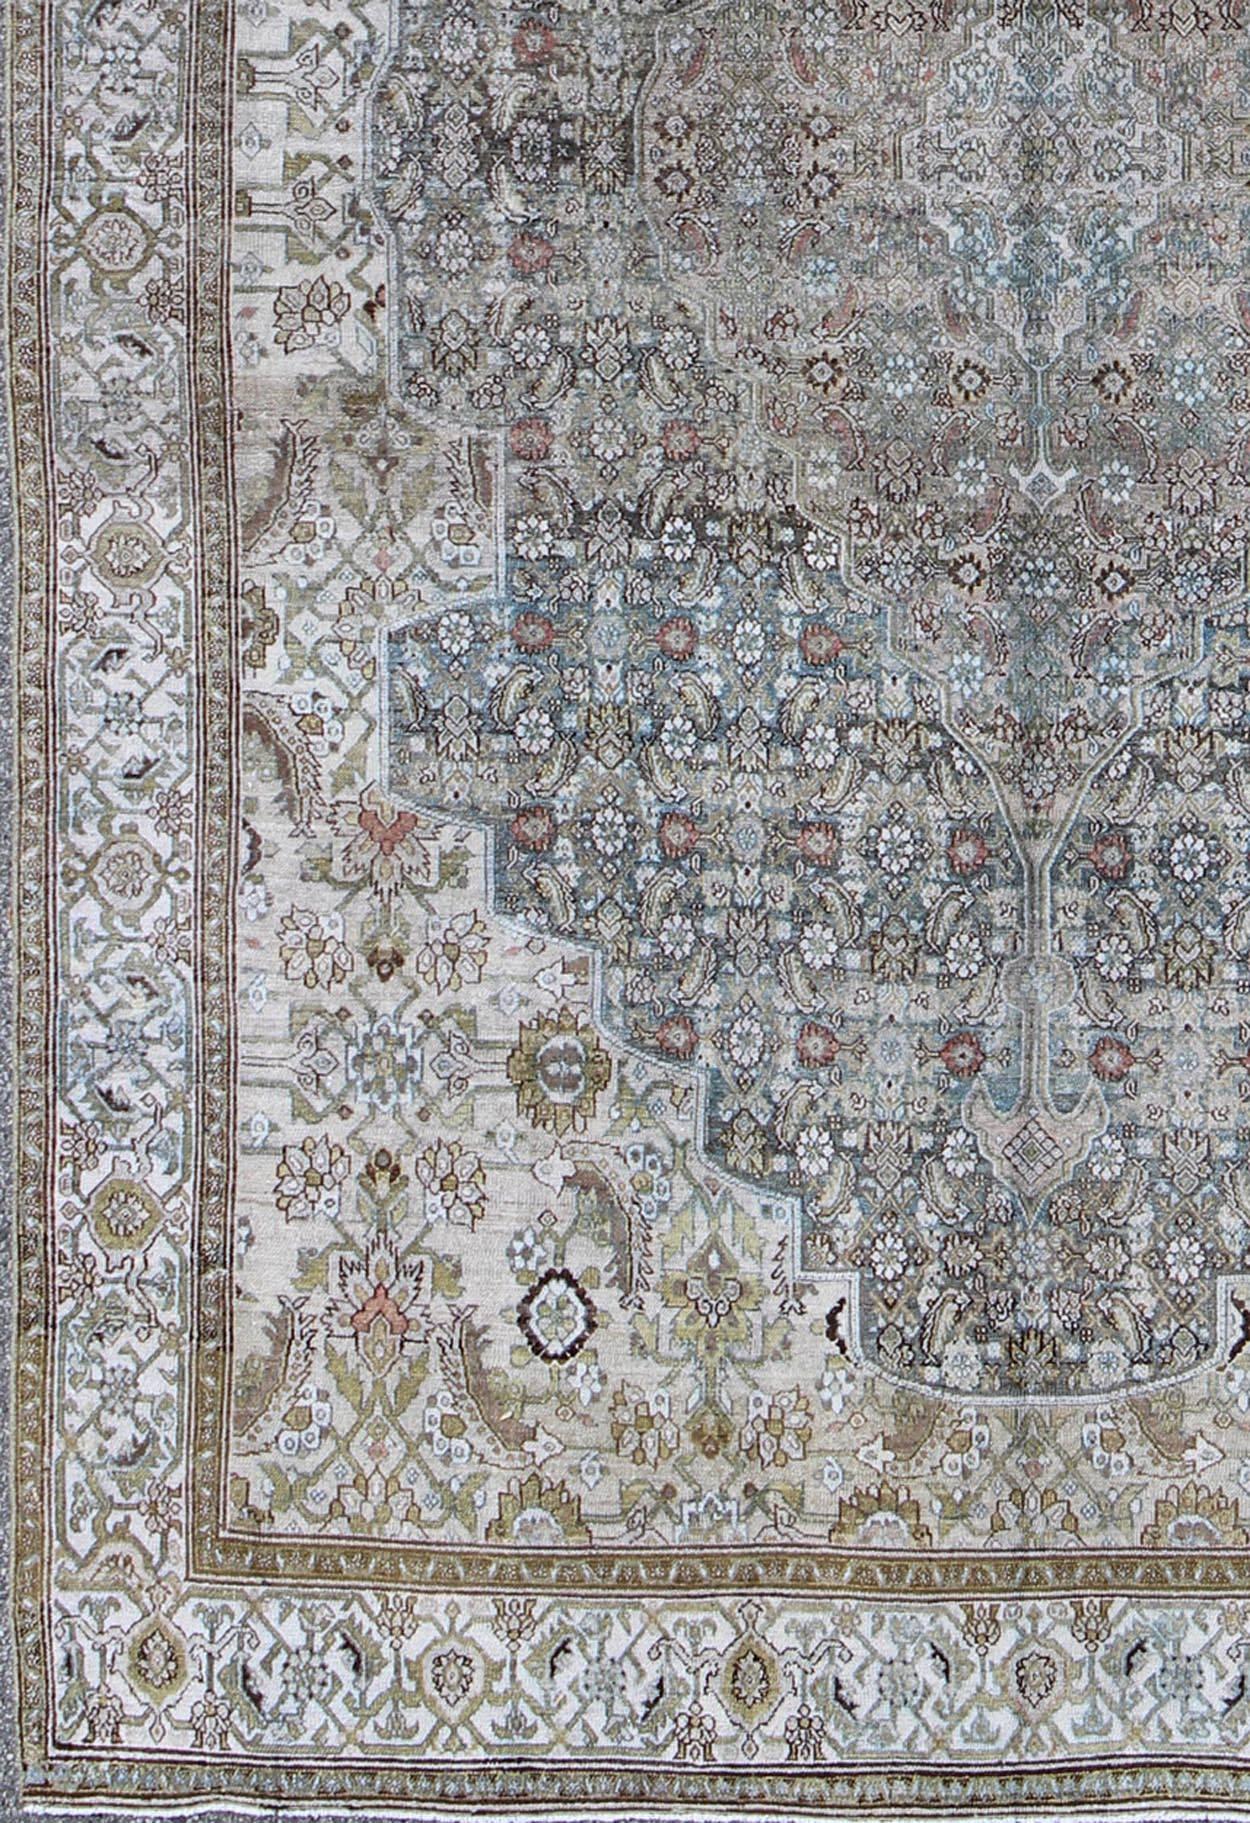 Steel blue and taupe antique Persian Malayer rug with medallion design, rug sus-1803-50, country of origin / type: Iran / Malayer, circa 1910

This antique Persian Malayer rug was handwoven in the early 20th century, (circa 1910) and bears a